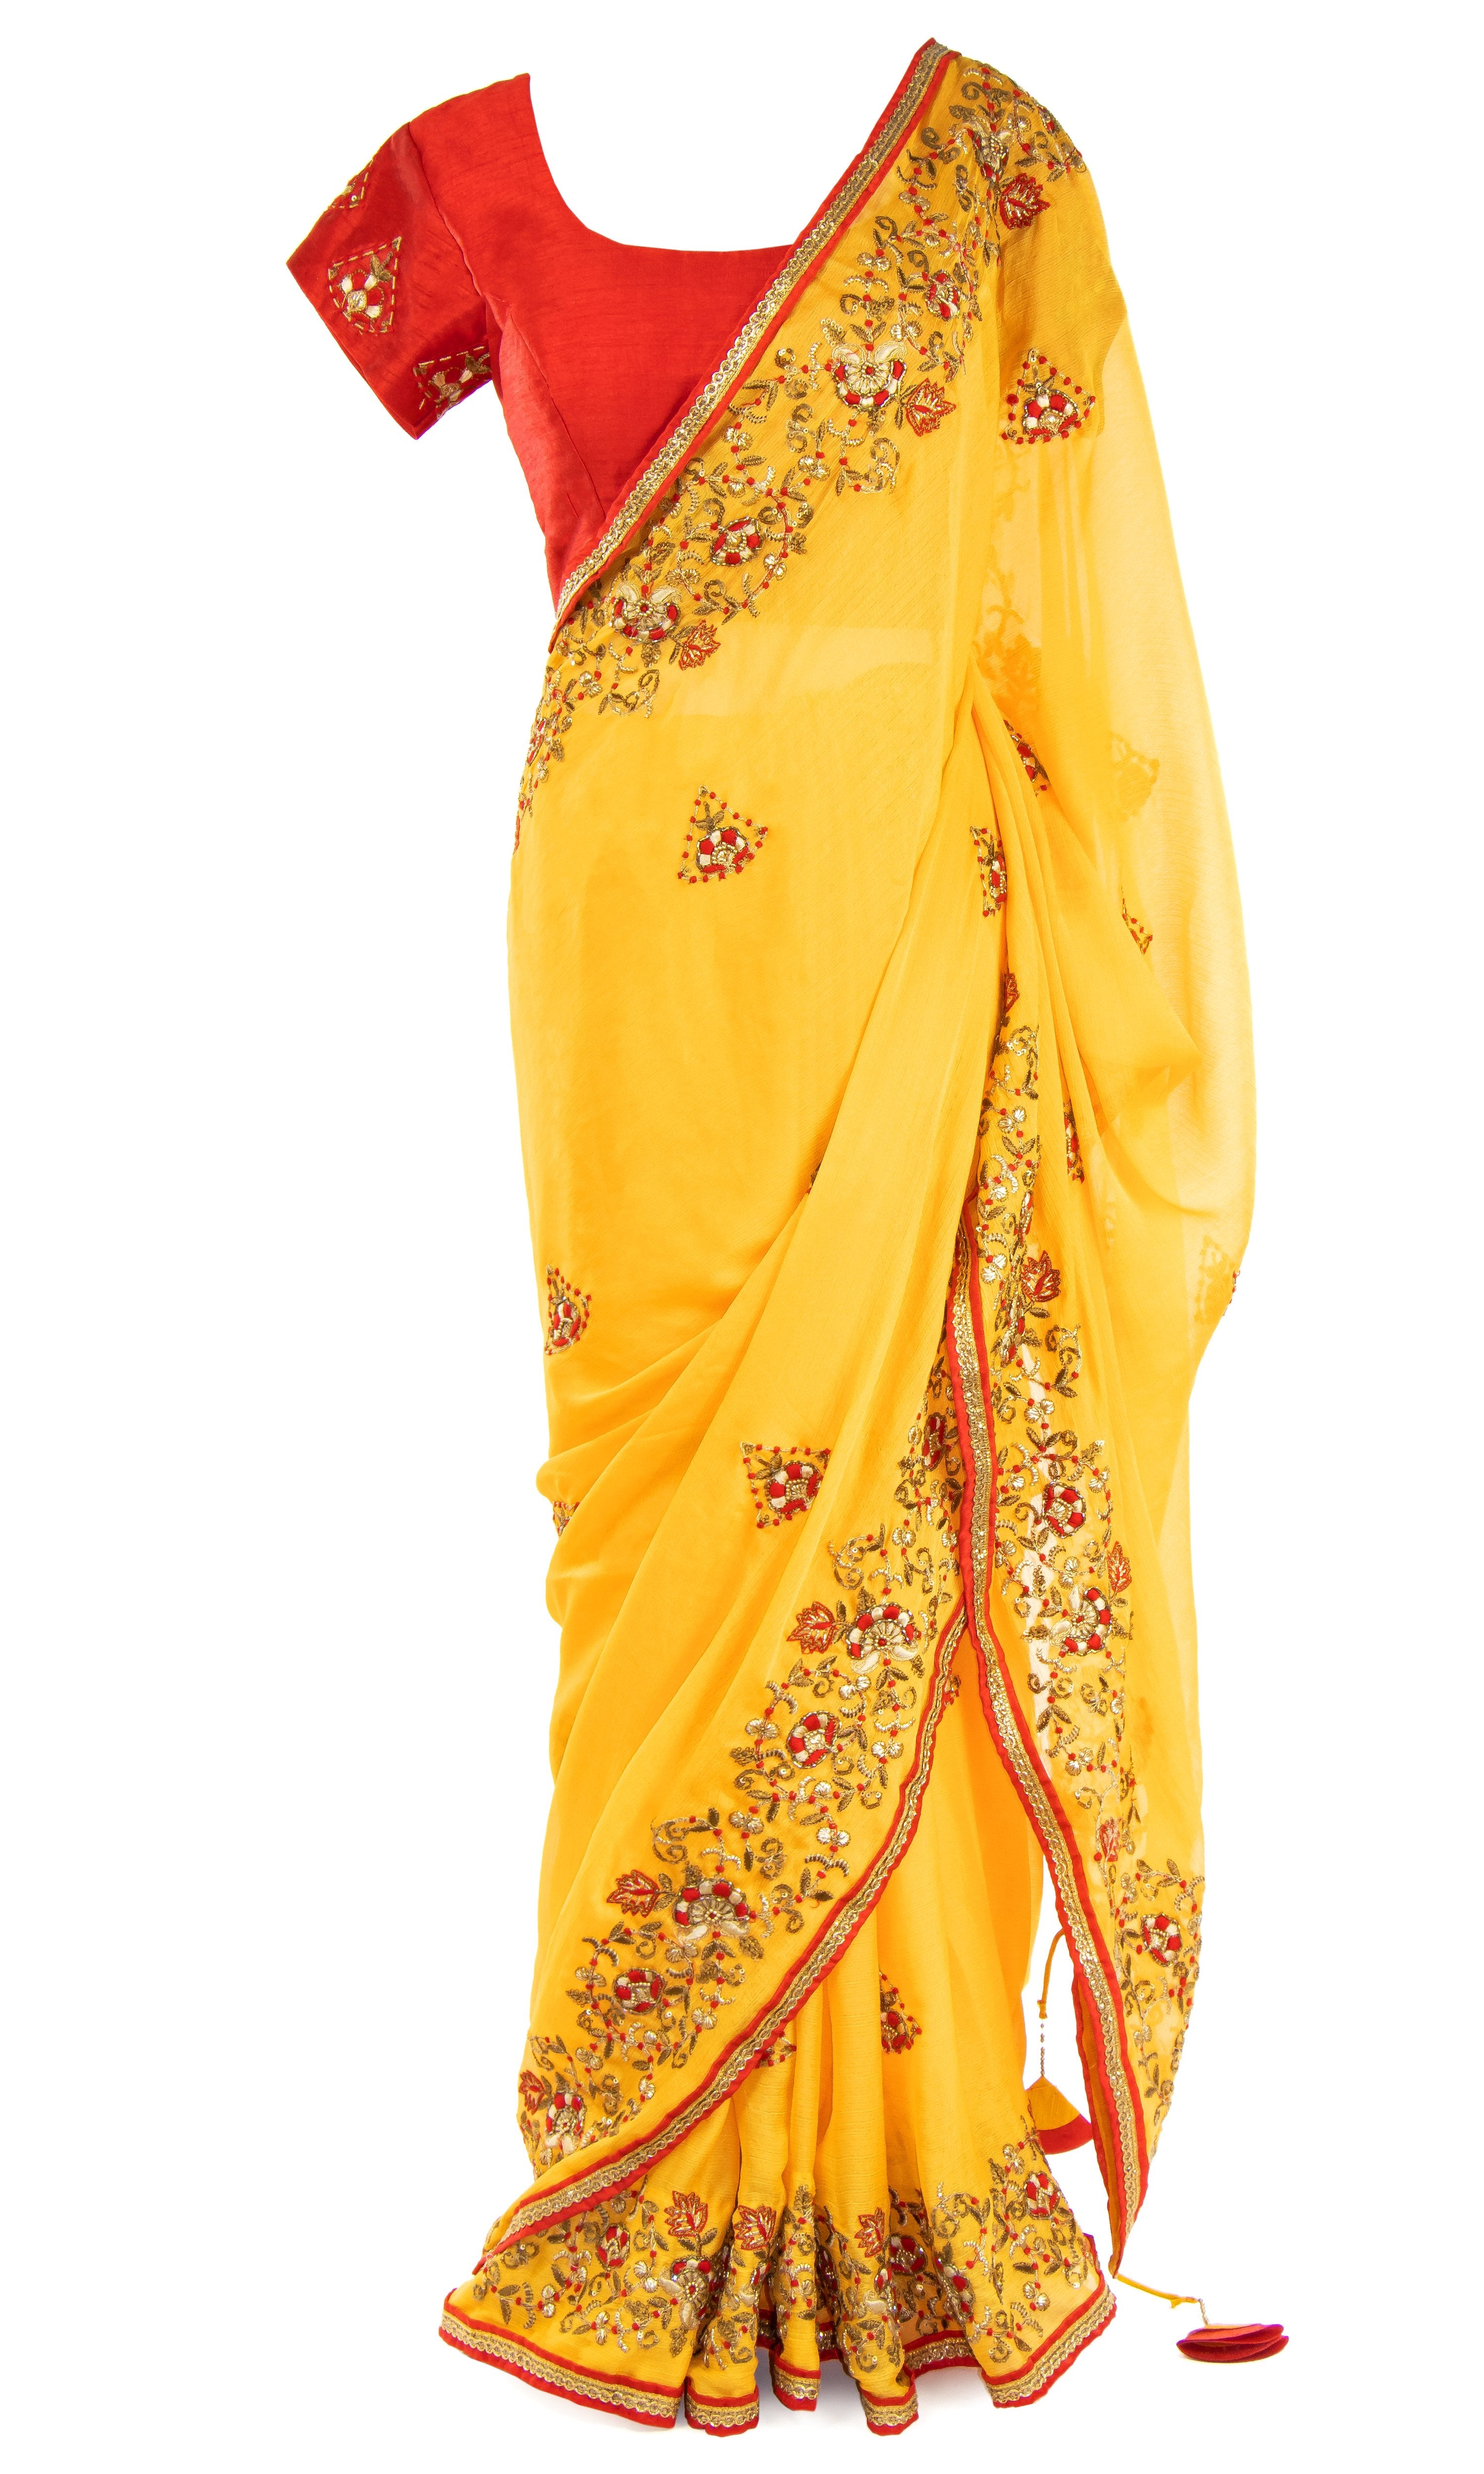 Saree is pre-pleated for your convenience. It’s paired with a yellow chiffon Saree. I see a European summer in your future.